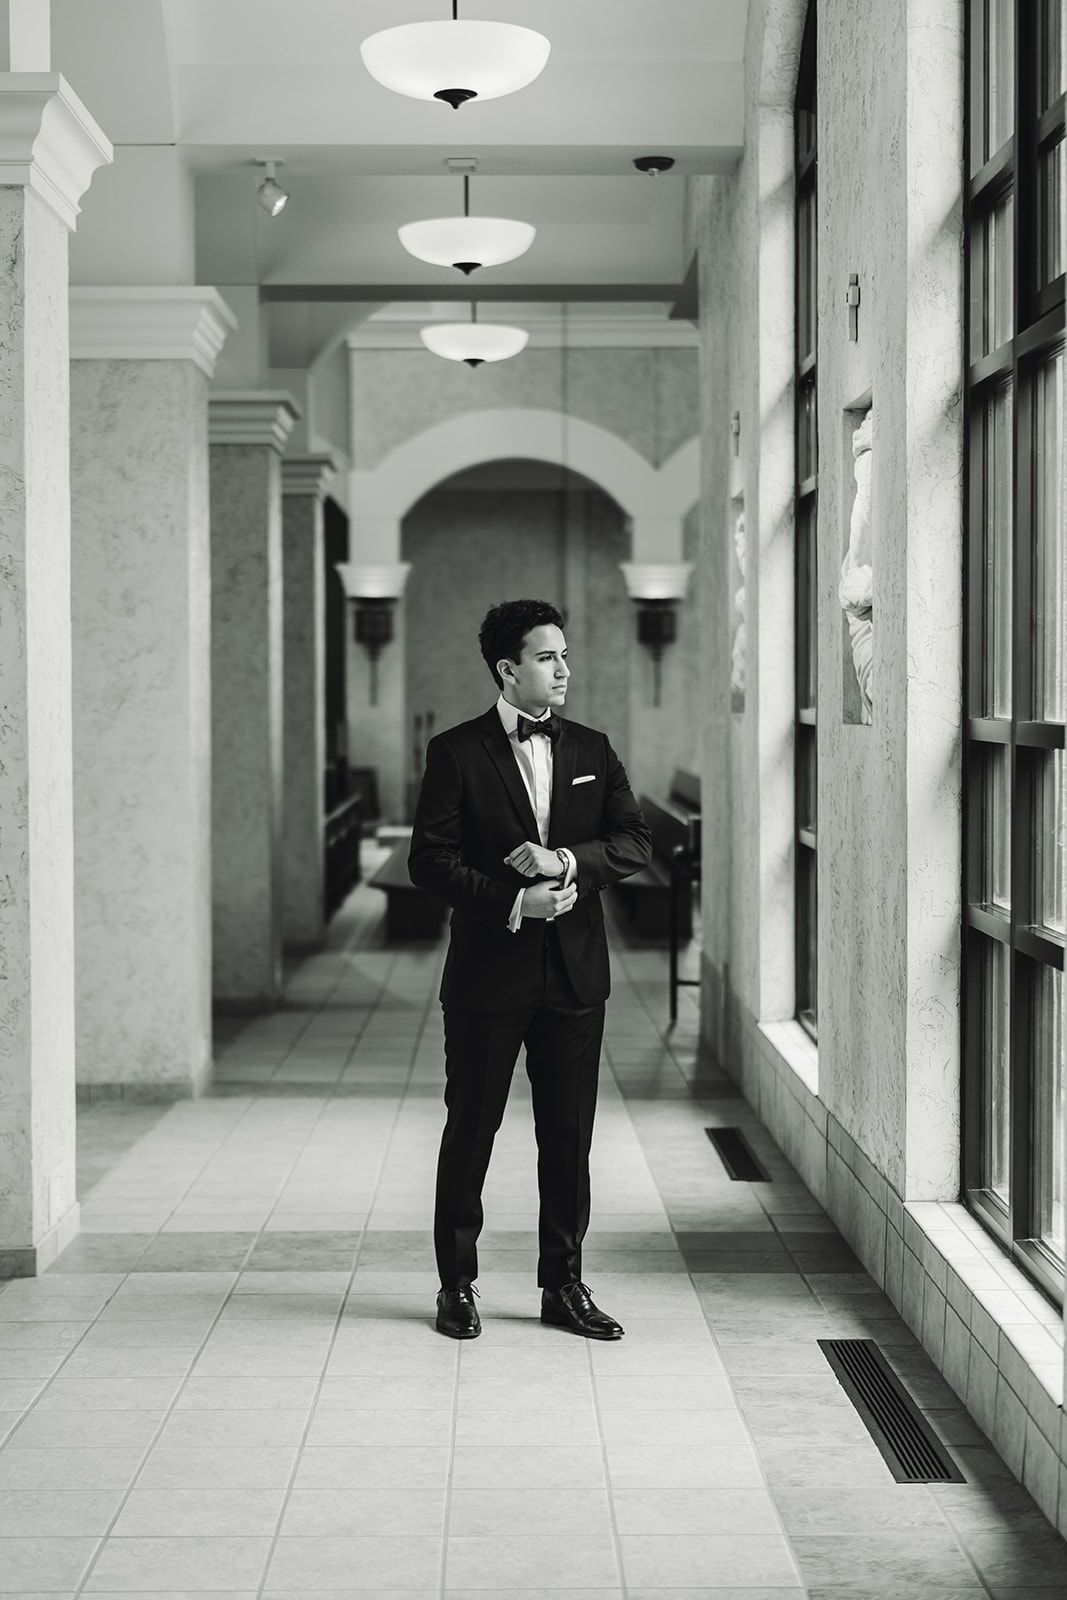 A man in a tuxedo is standing in a hallway next to a window.